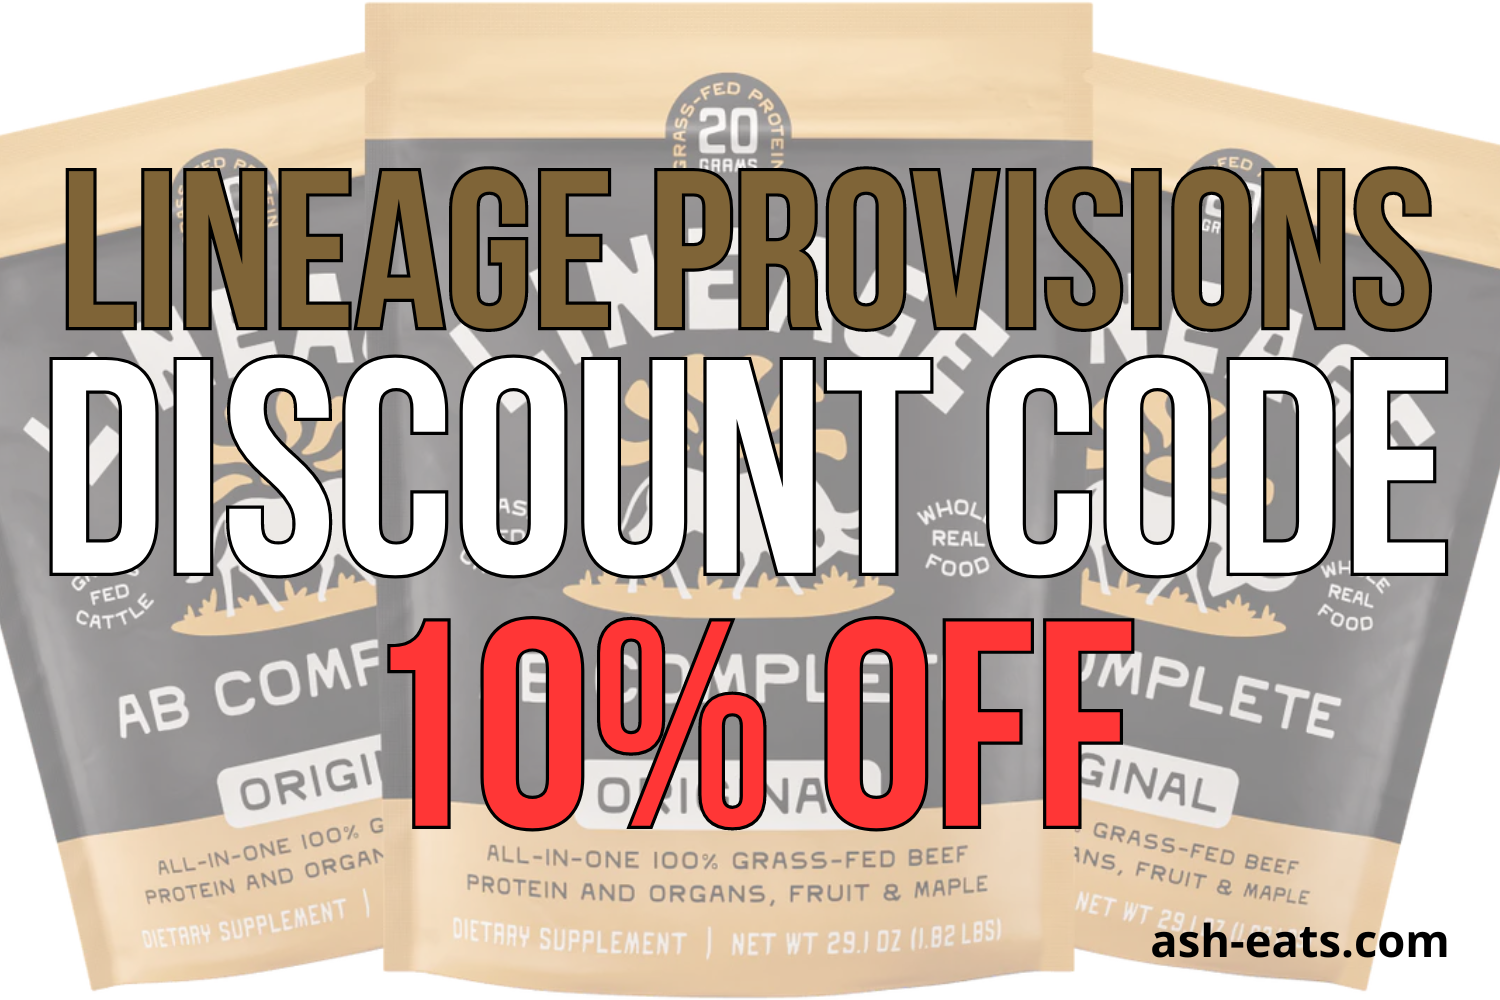 lineage provisions discount code